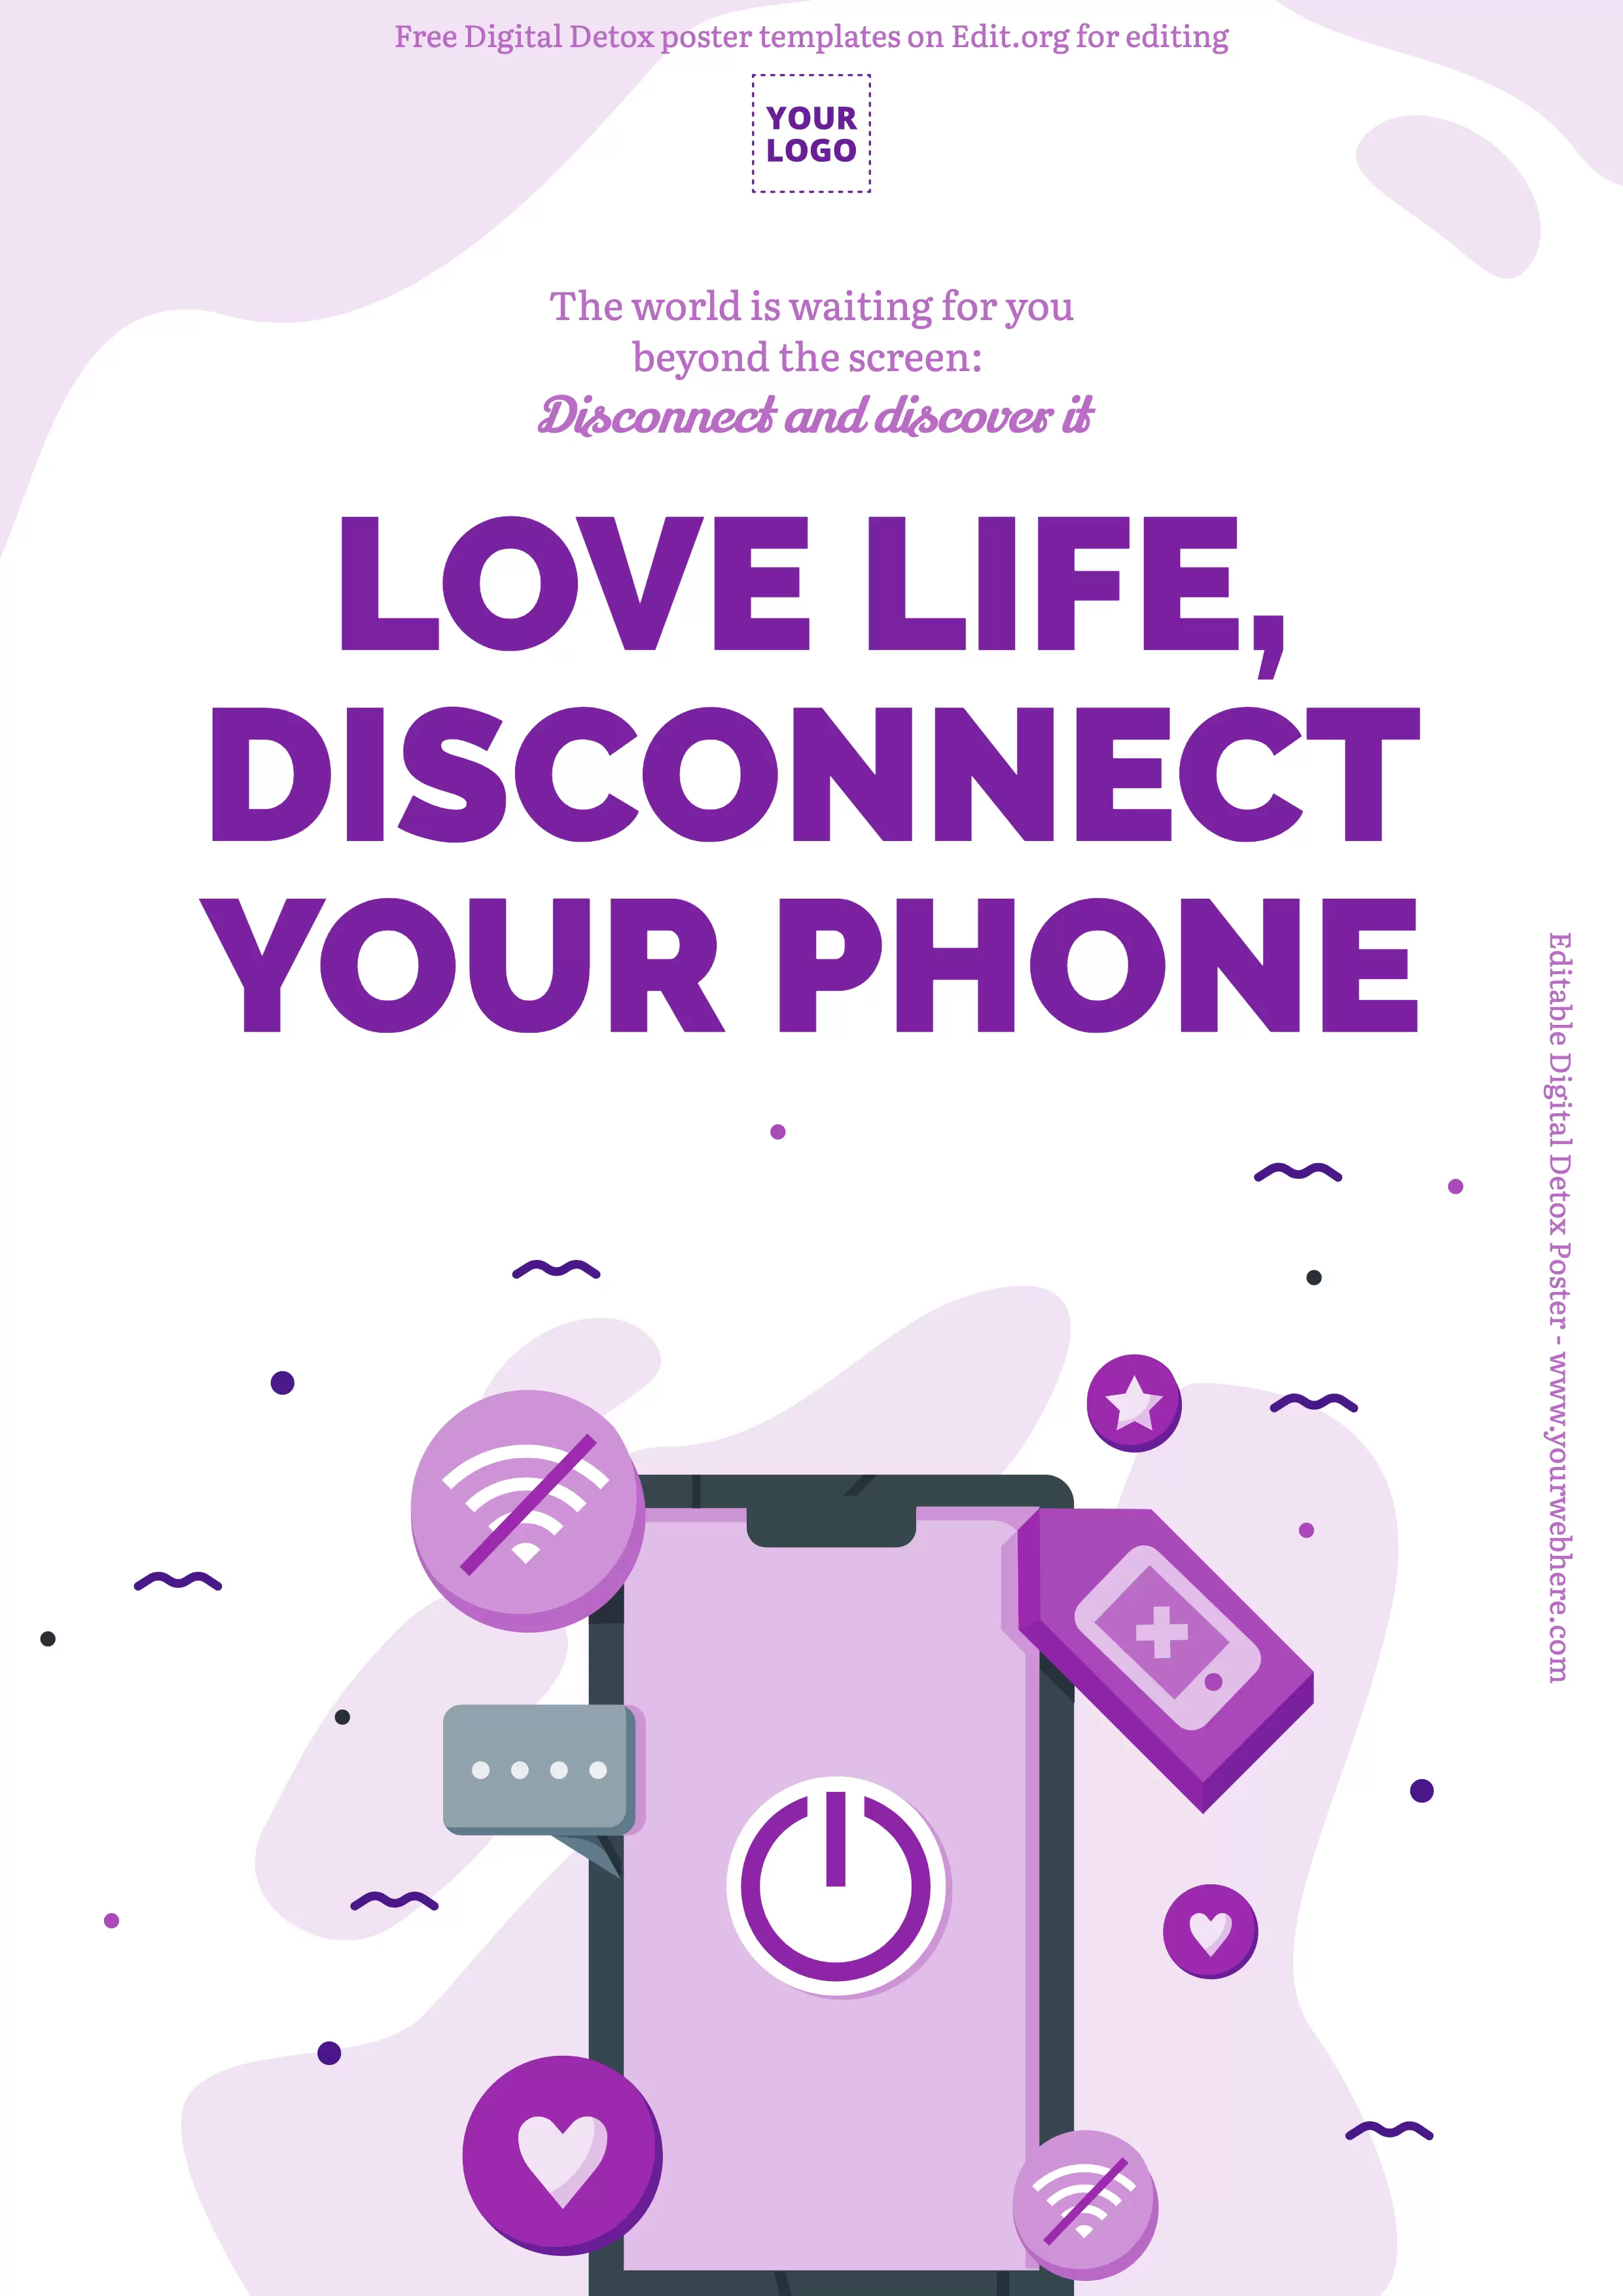 Printable poster on Digital Detox from screens